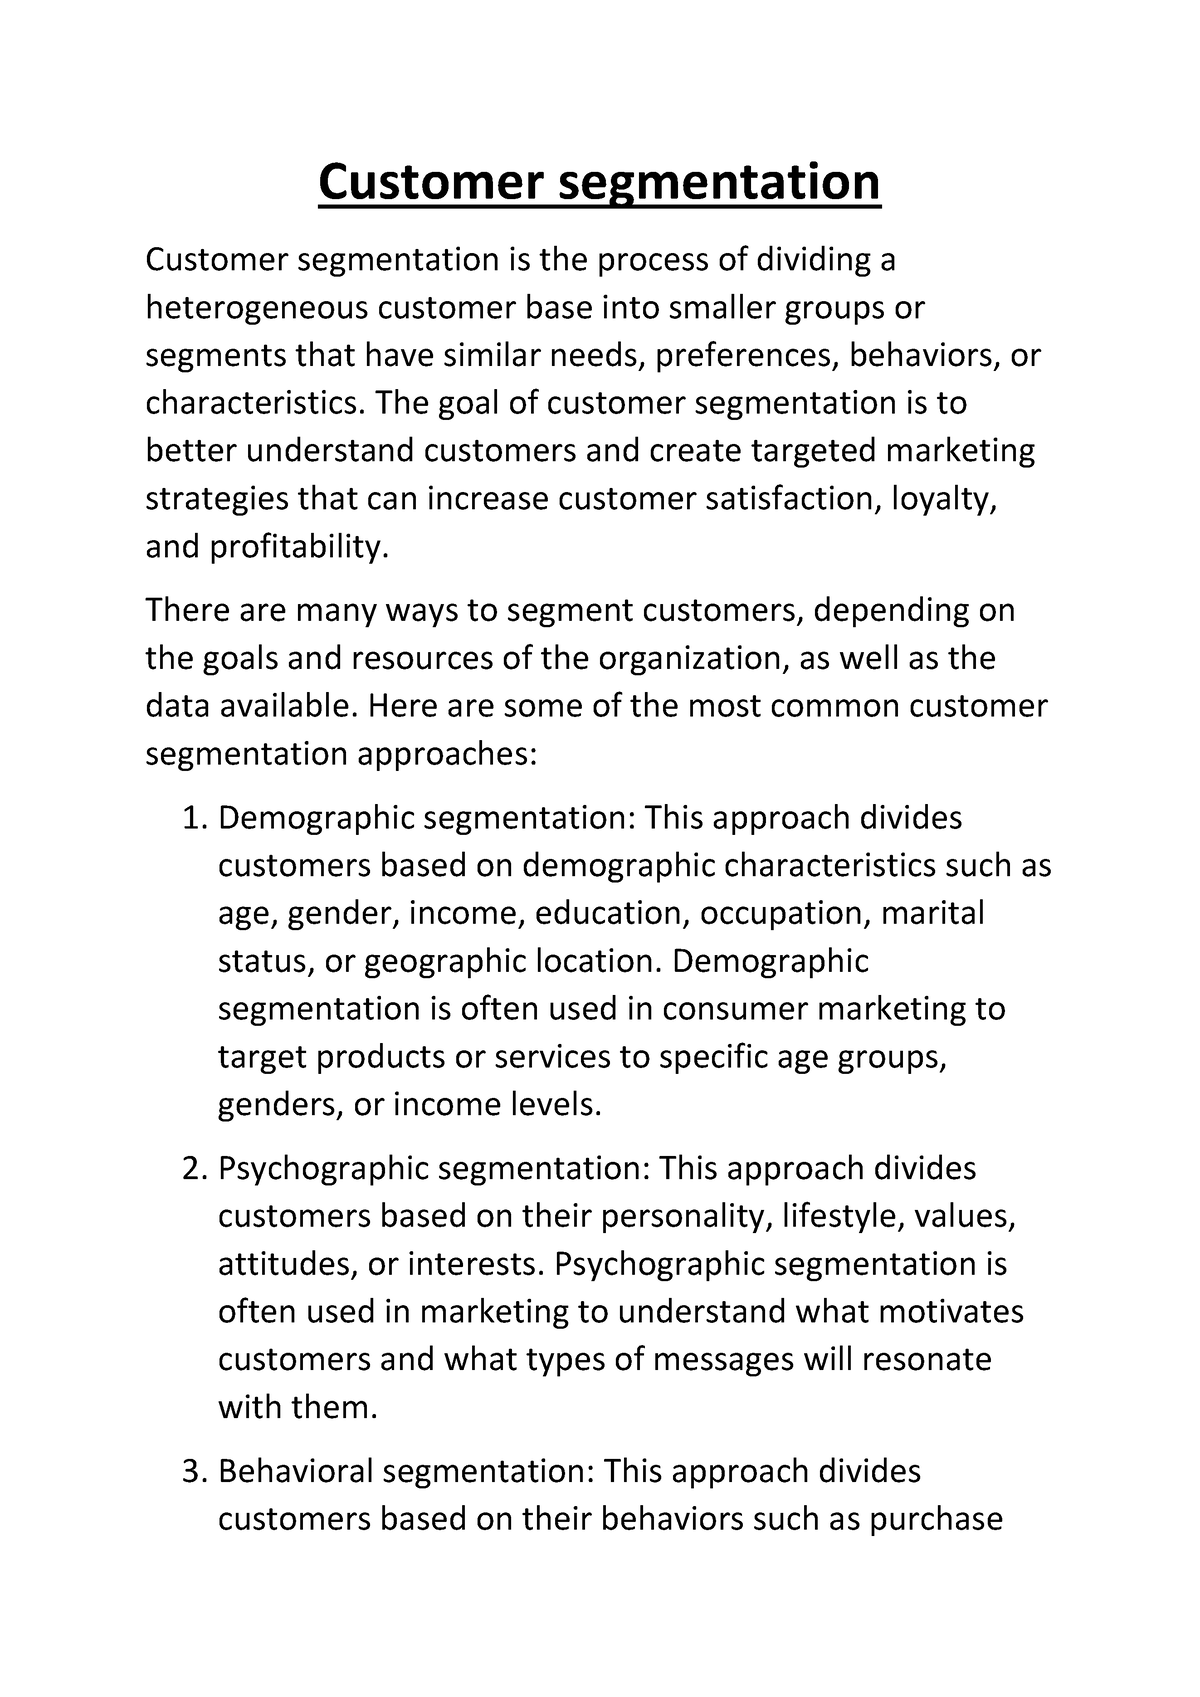 research papers on customer segmentation